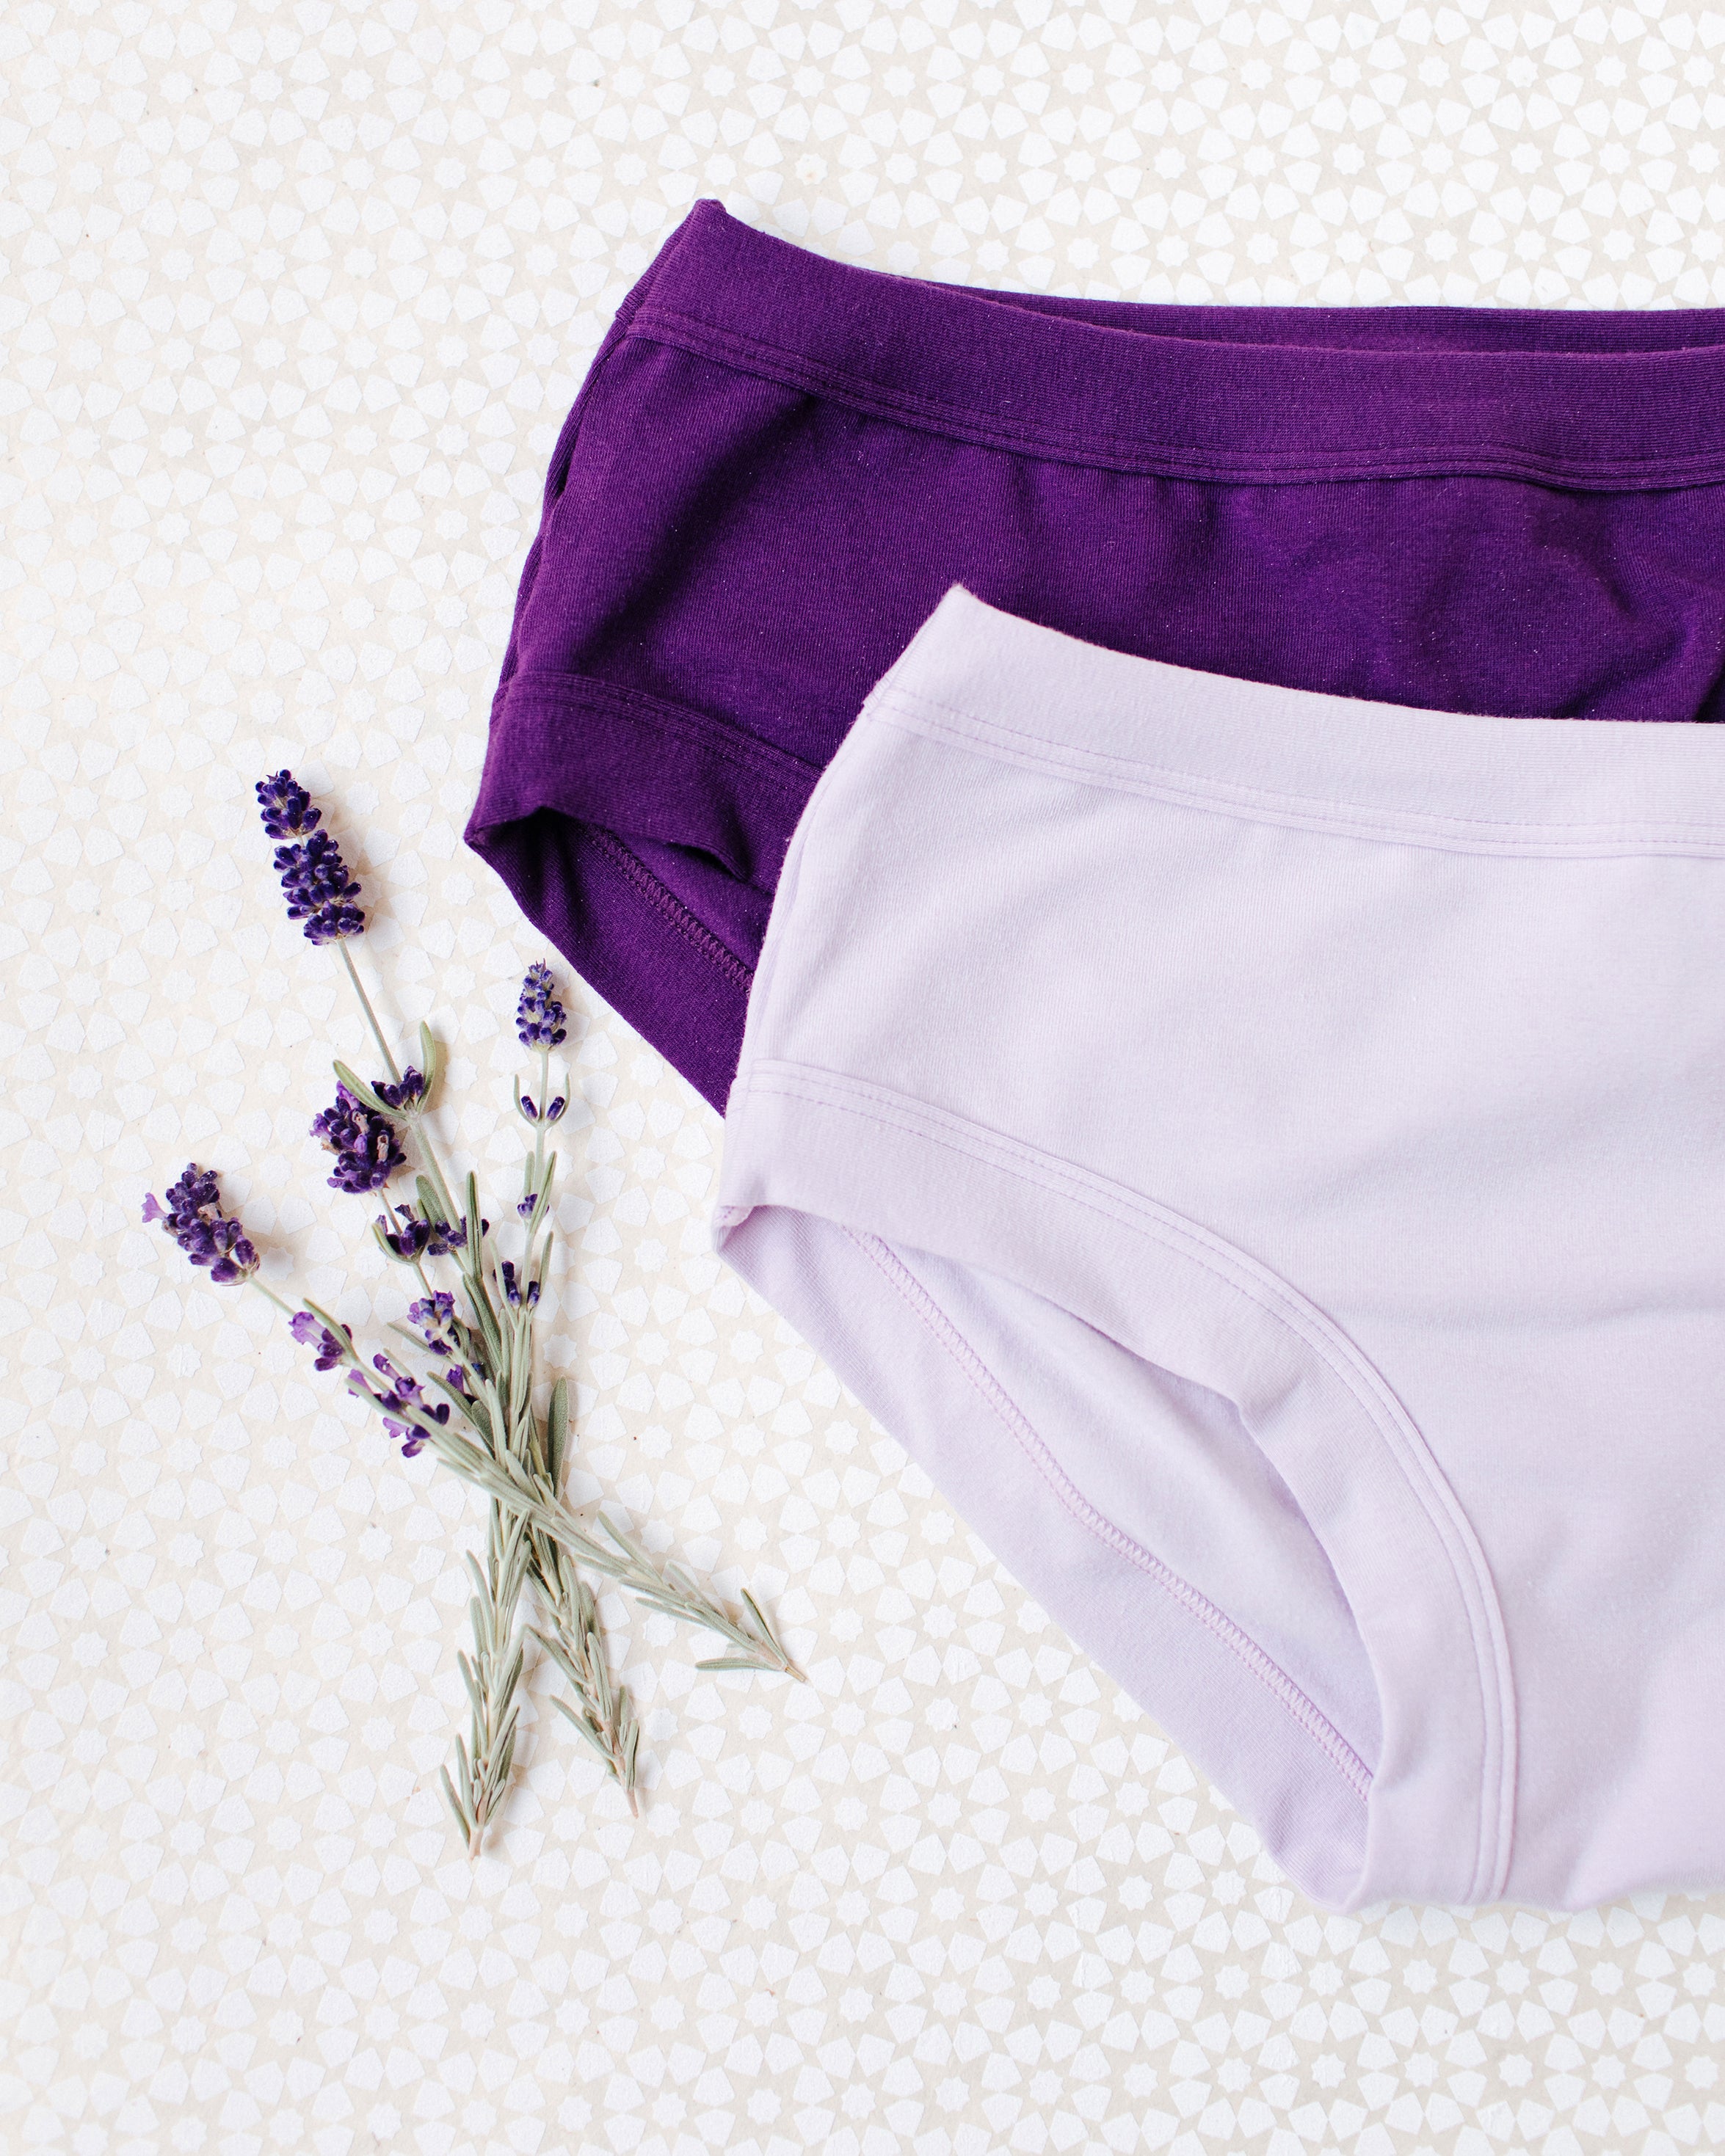 Flat lay of Light Lavender and Deep Amethyst Hipster style underwear on a white patterned surface with lavender sprigs.